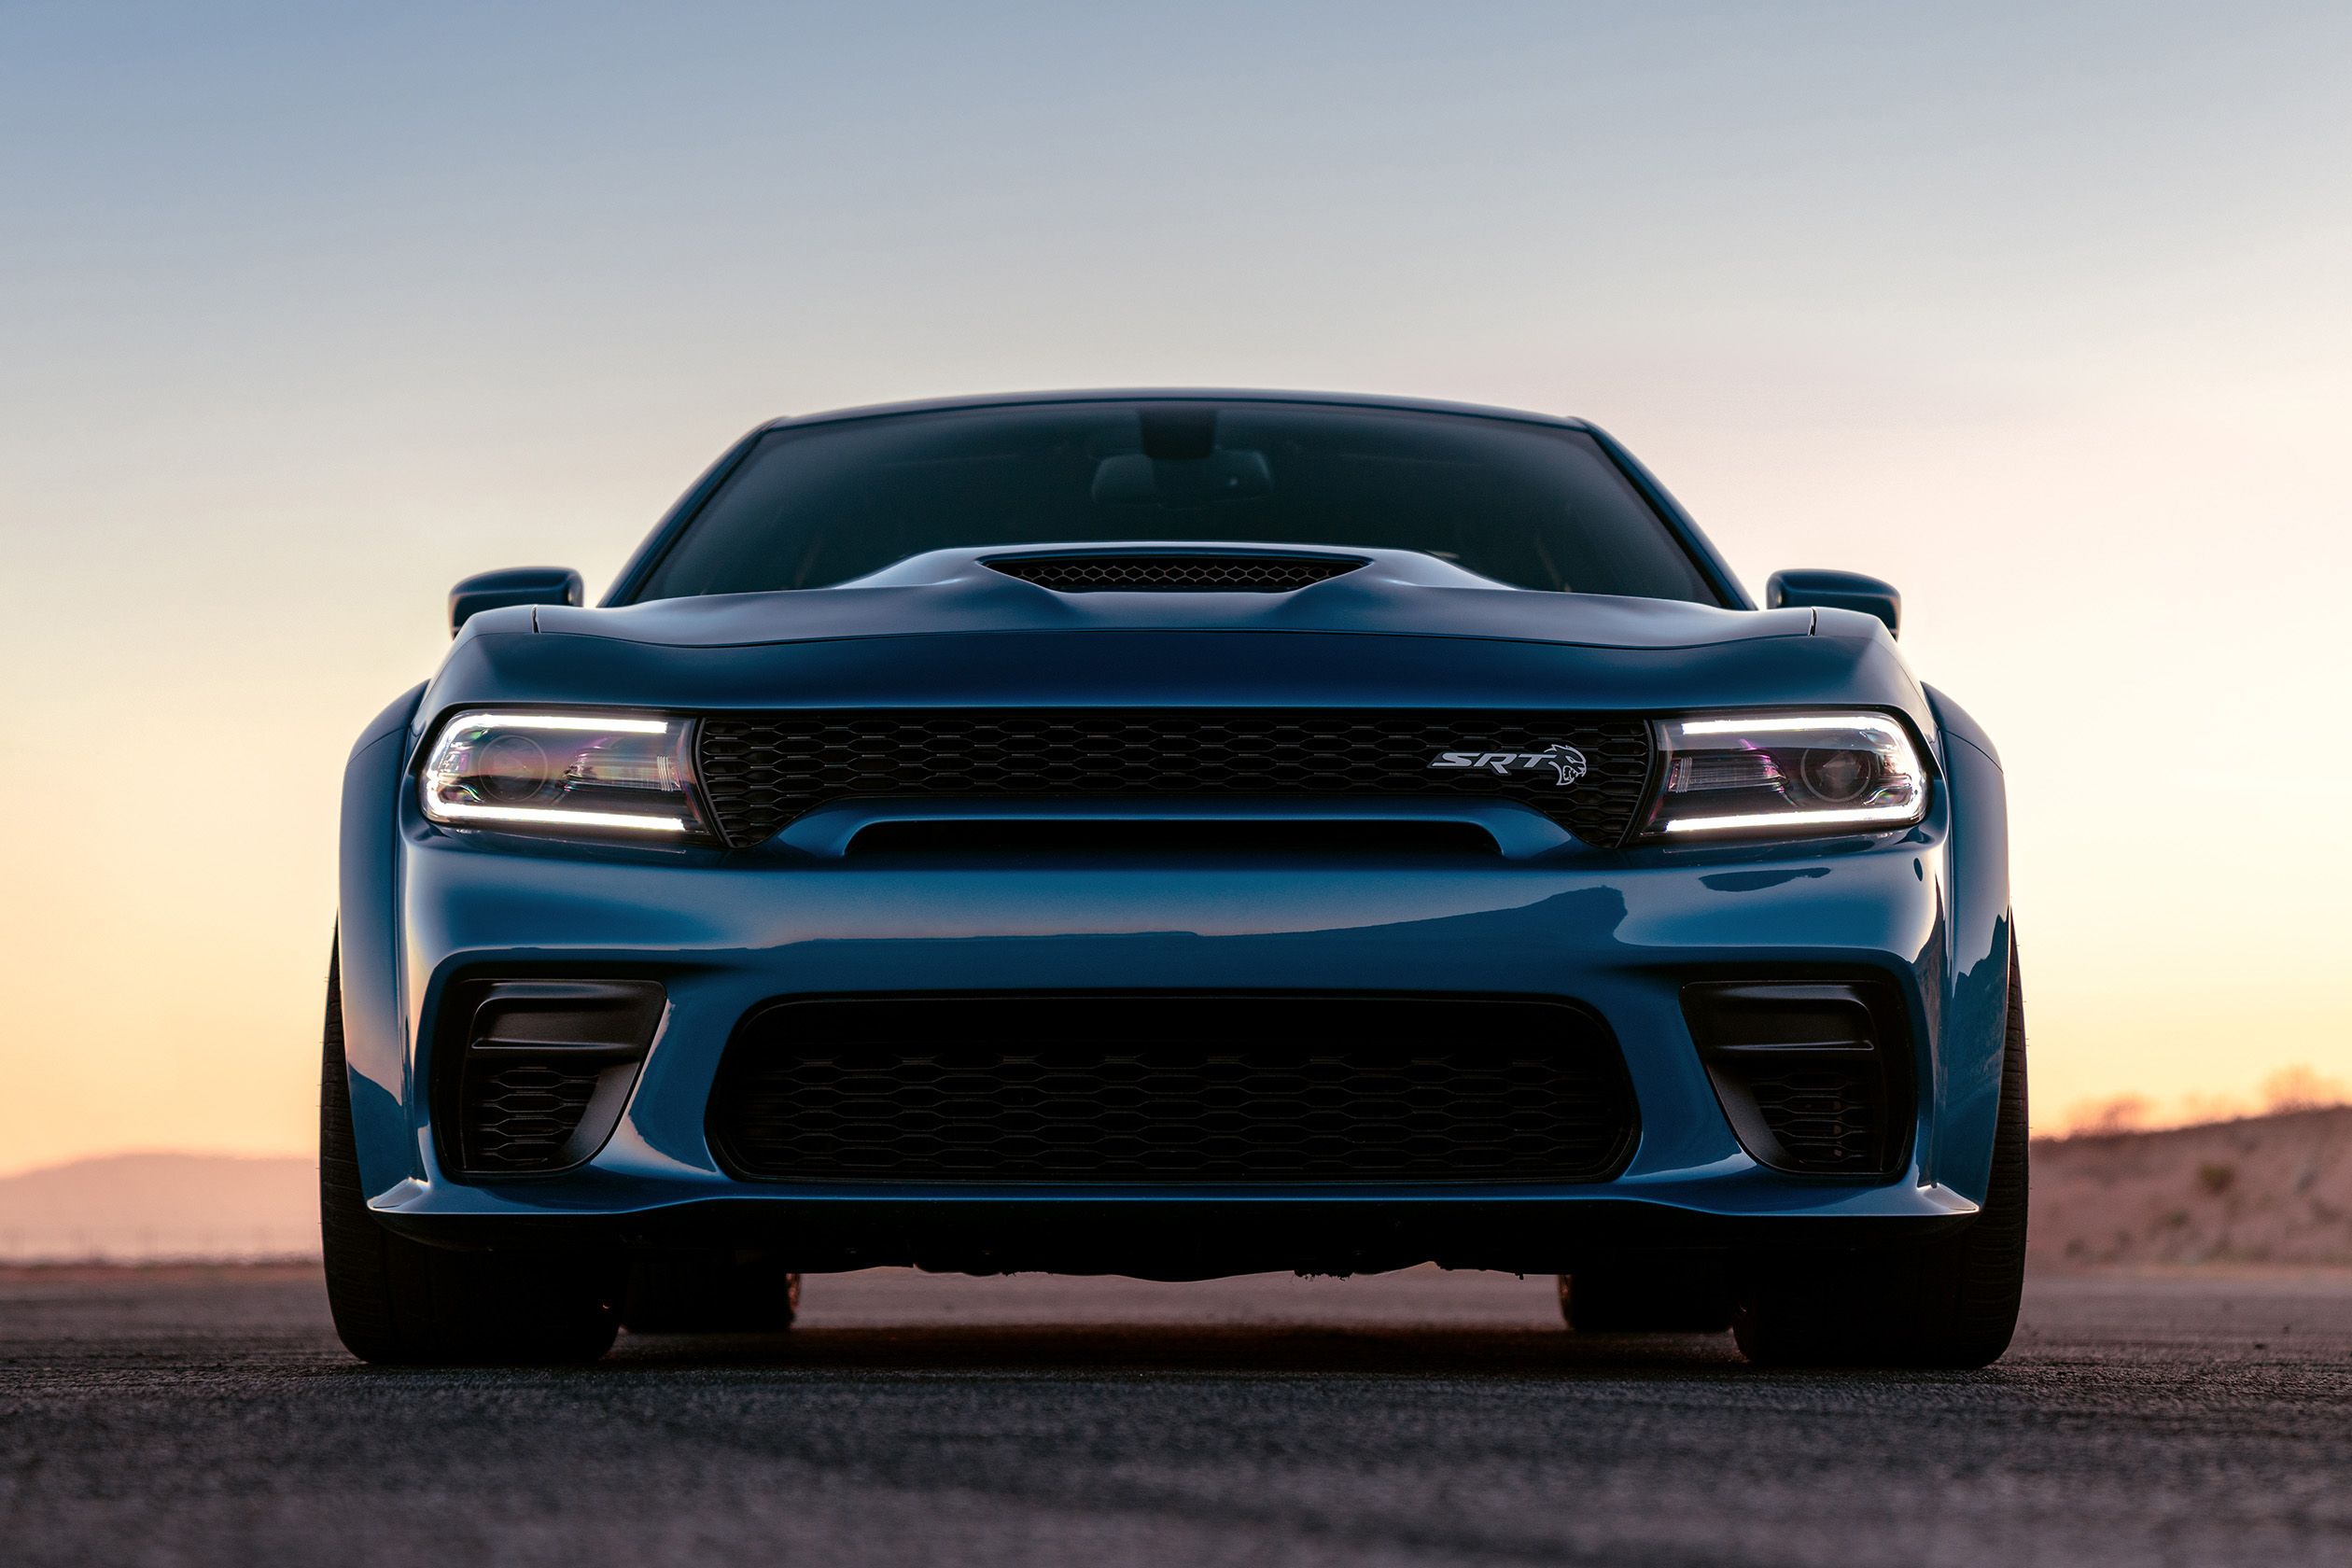 2020 Dodge Charger SRT Hellcat Widebody Pictures, Specs, and HP